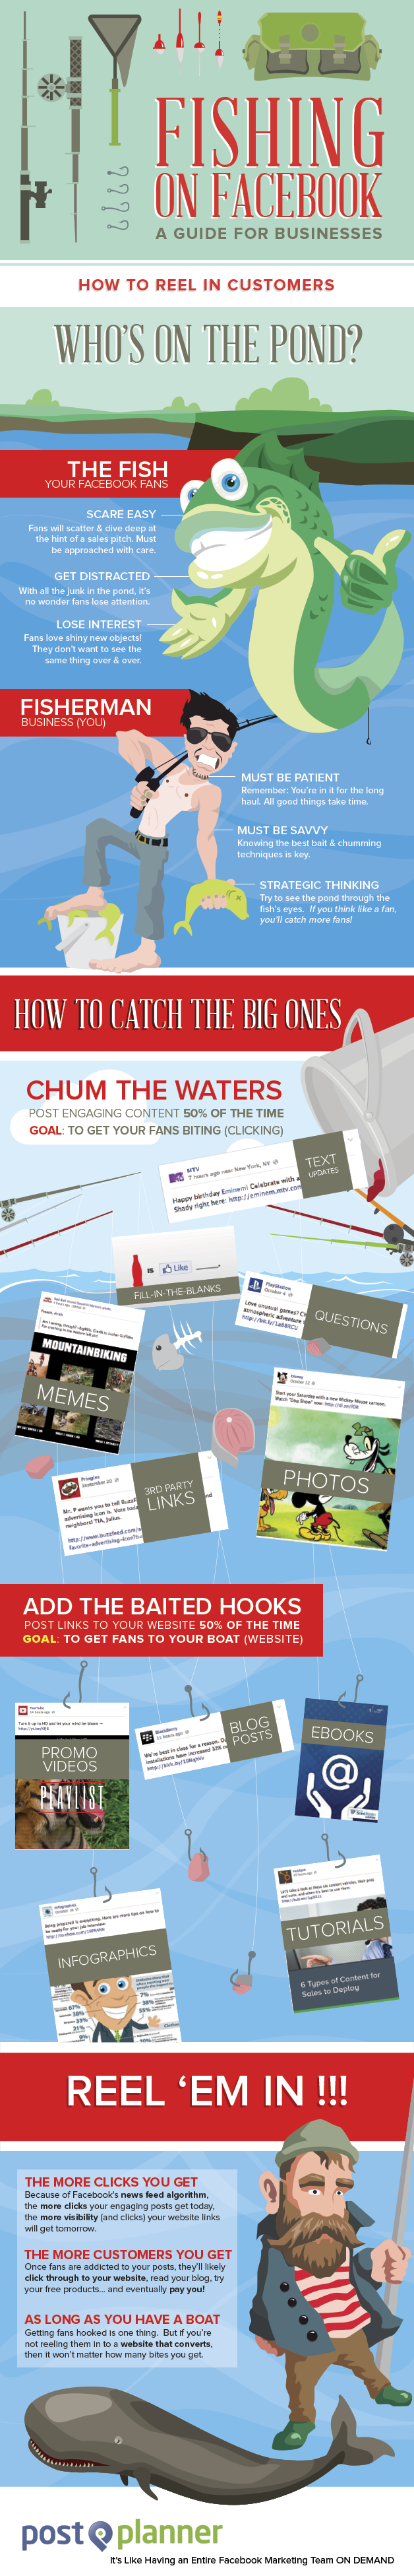 guide for fishing on facebook infograph